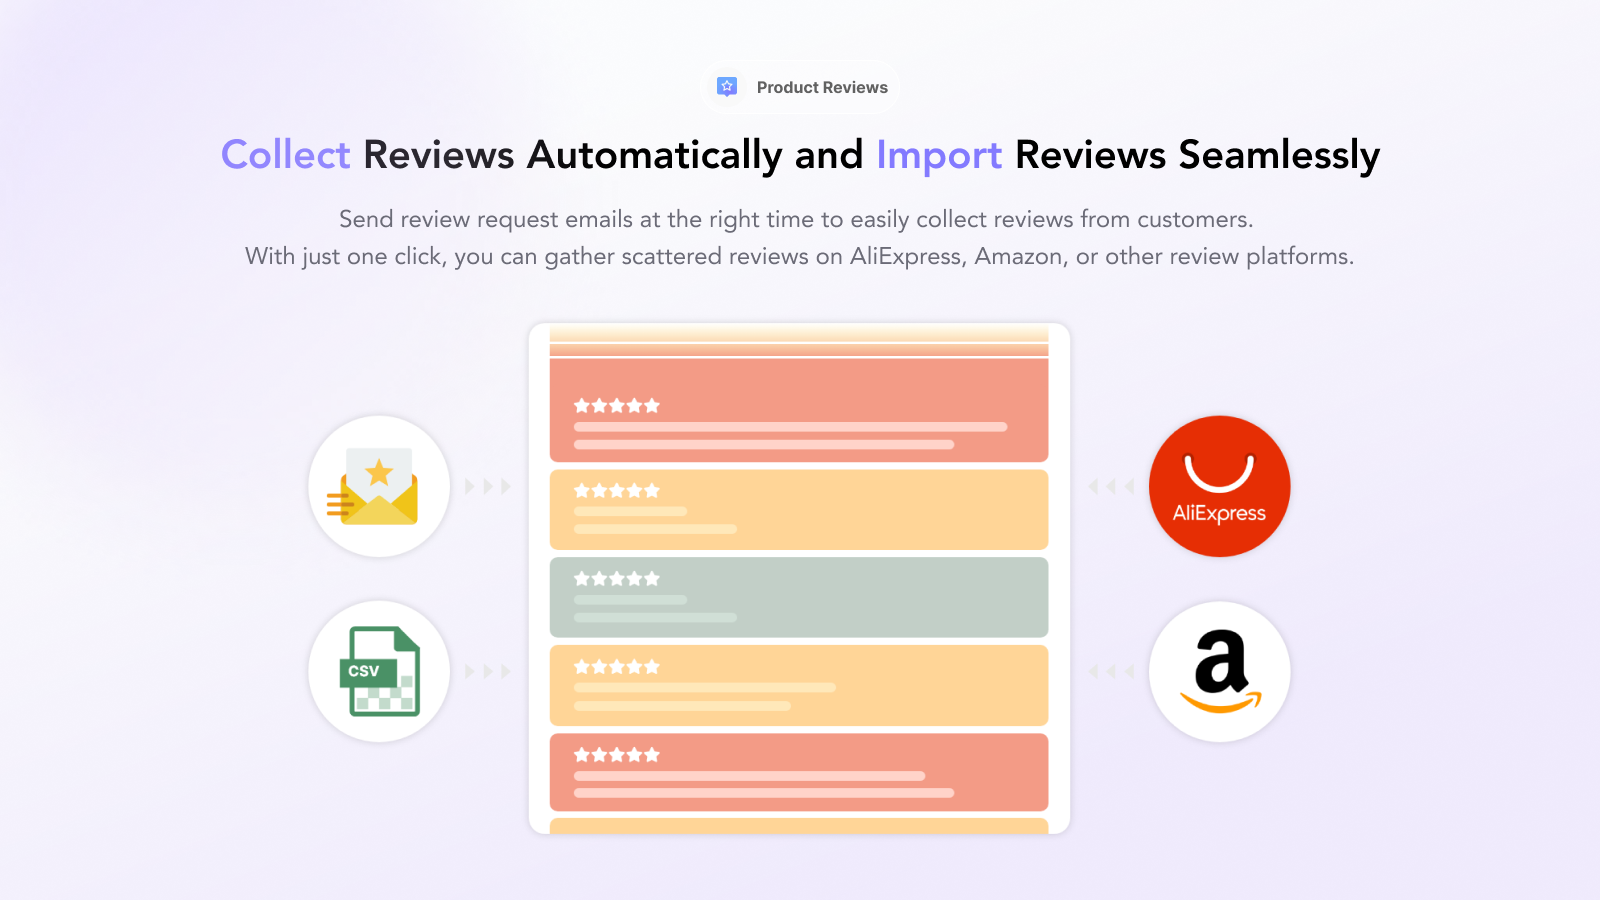 Seamless & Unlimited Review Import